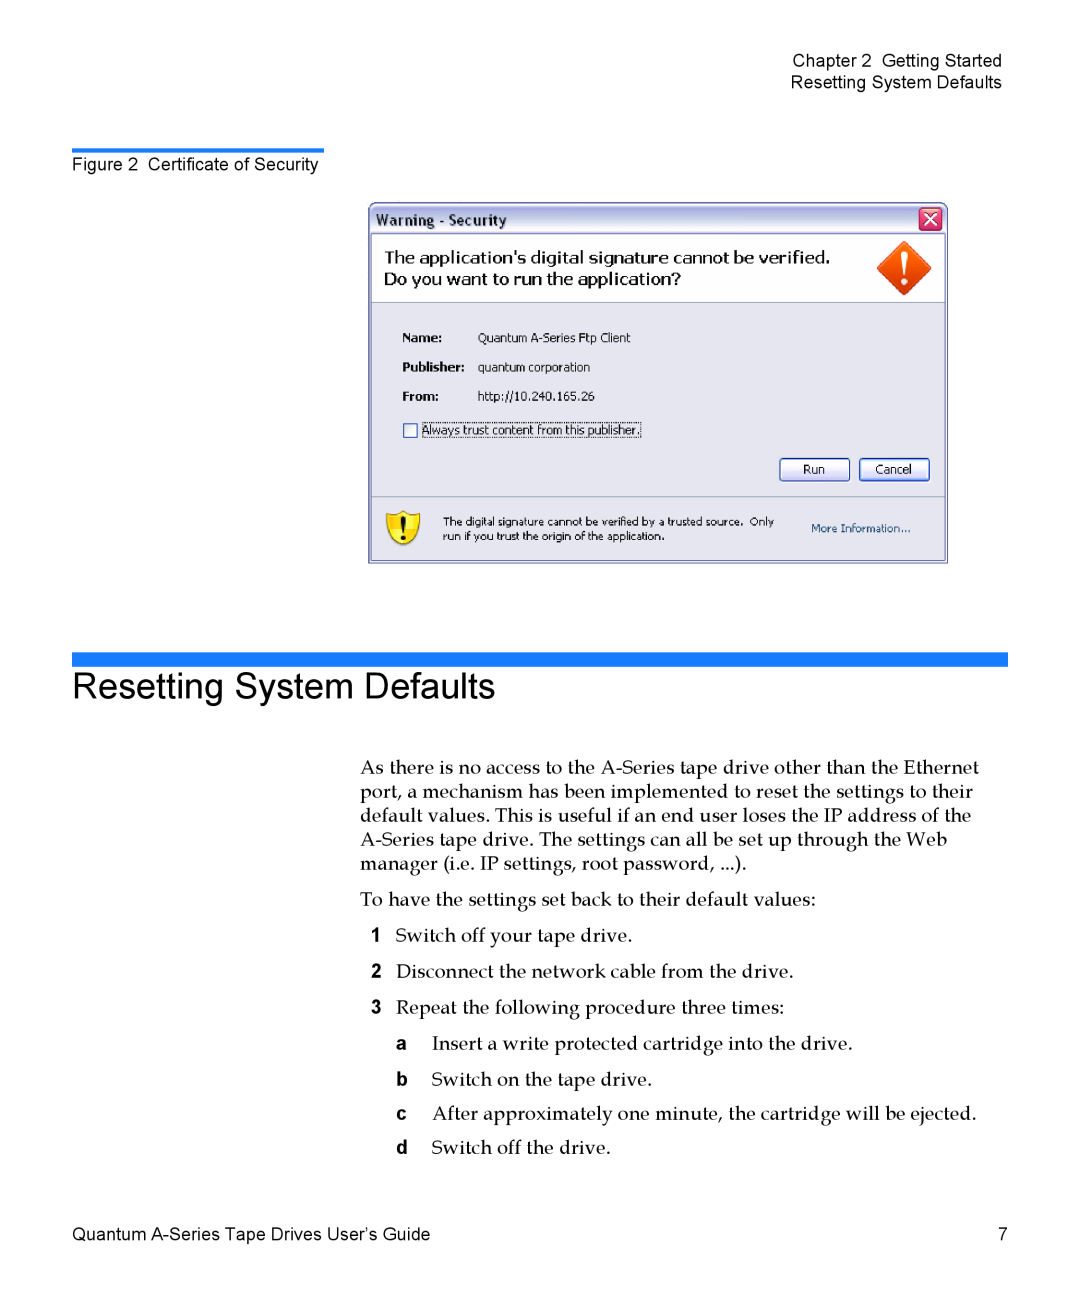 Quantum A-Series manual Resetting System Defaults 